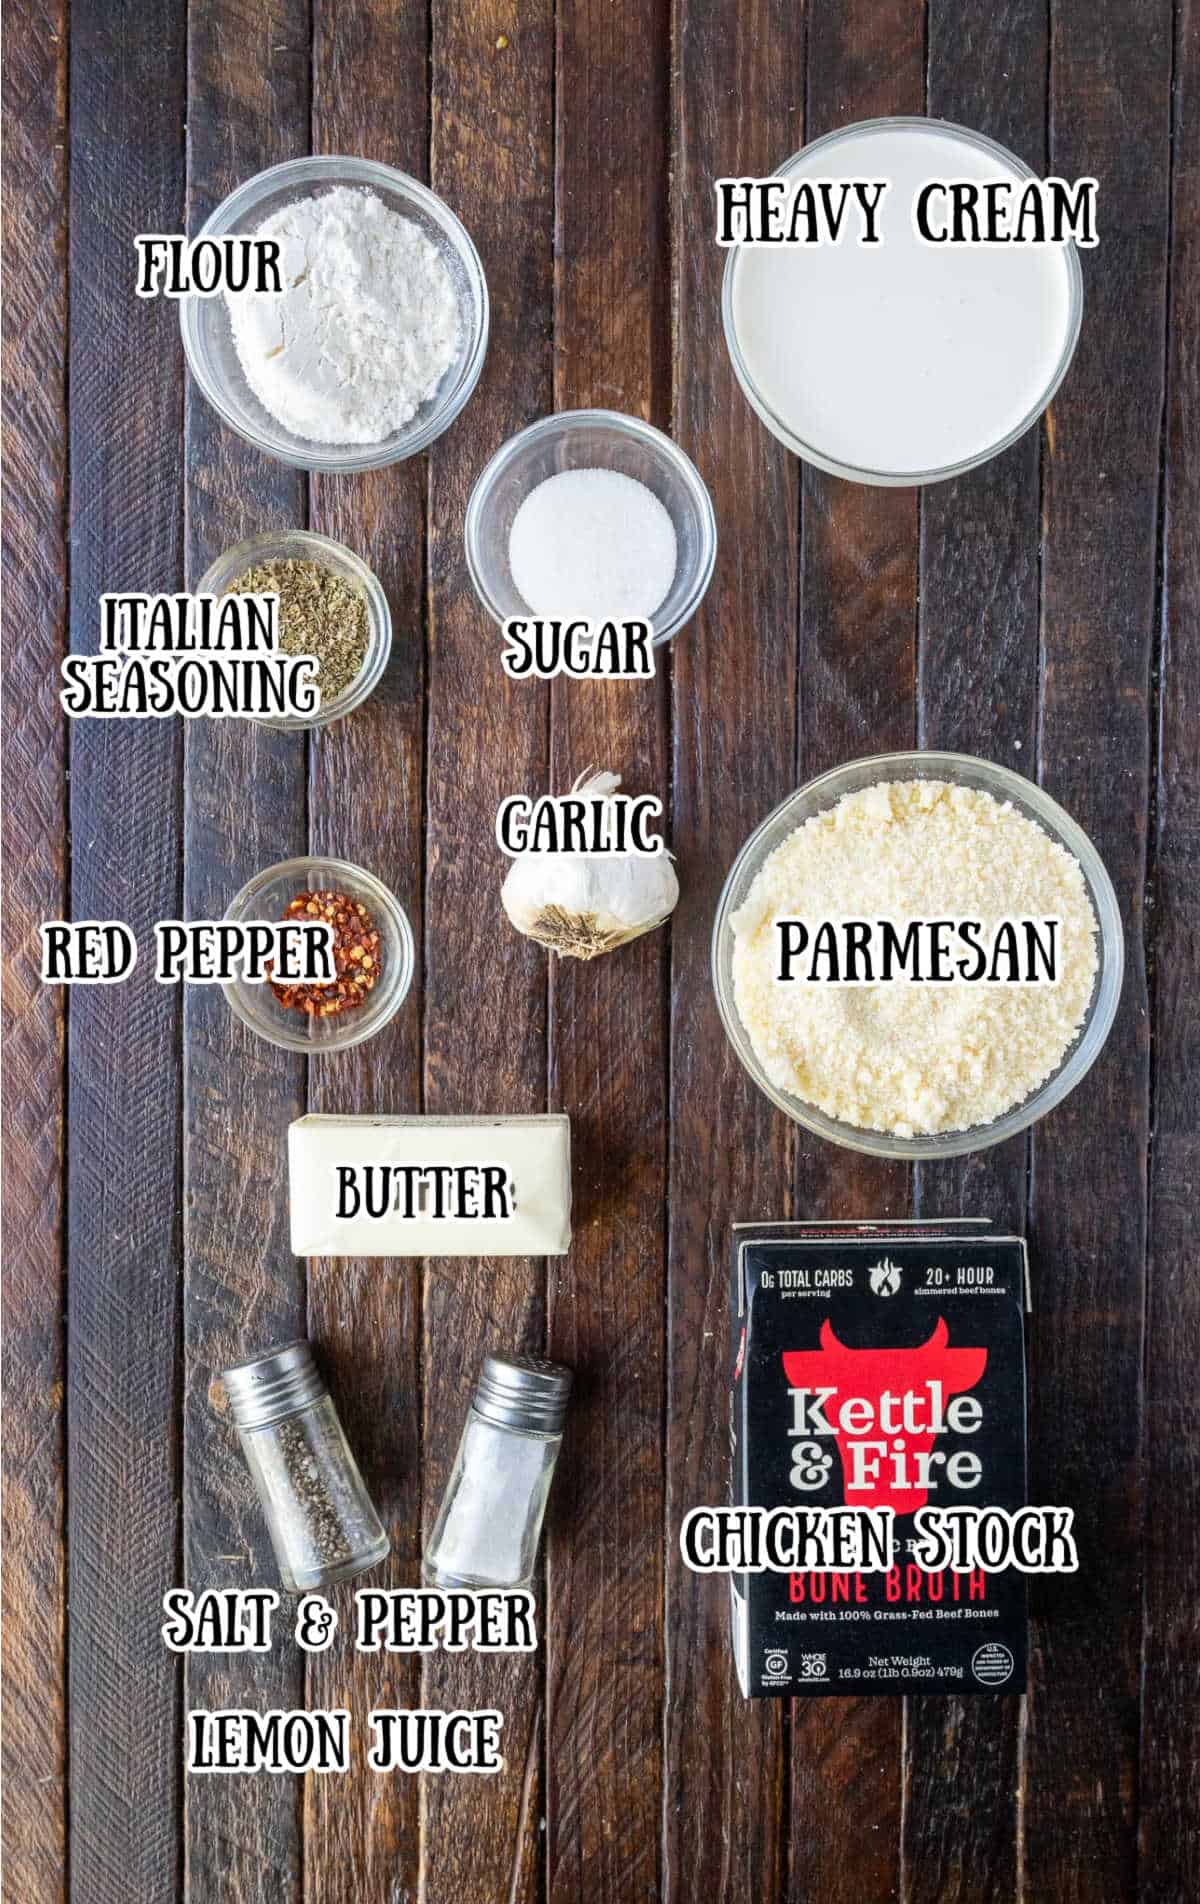 Labelled ingredients for garlic parmesan sauce on a wooden counter.